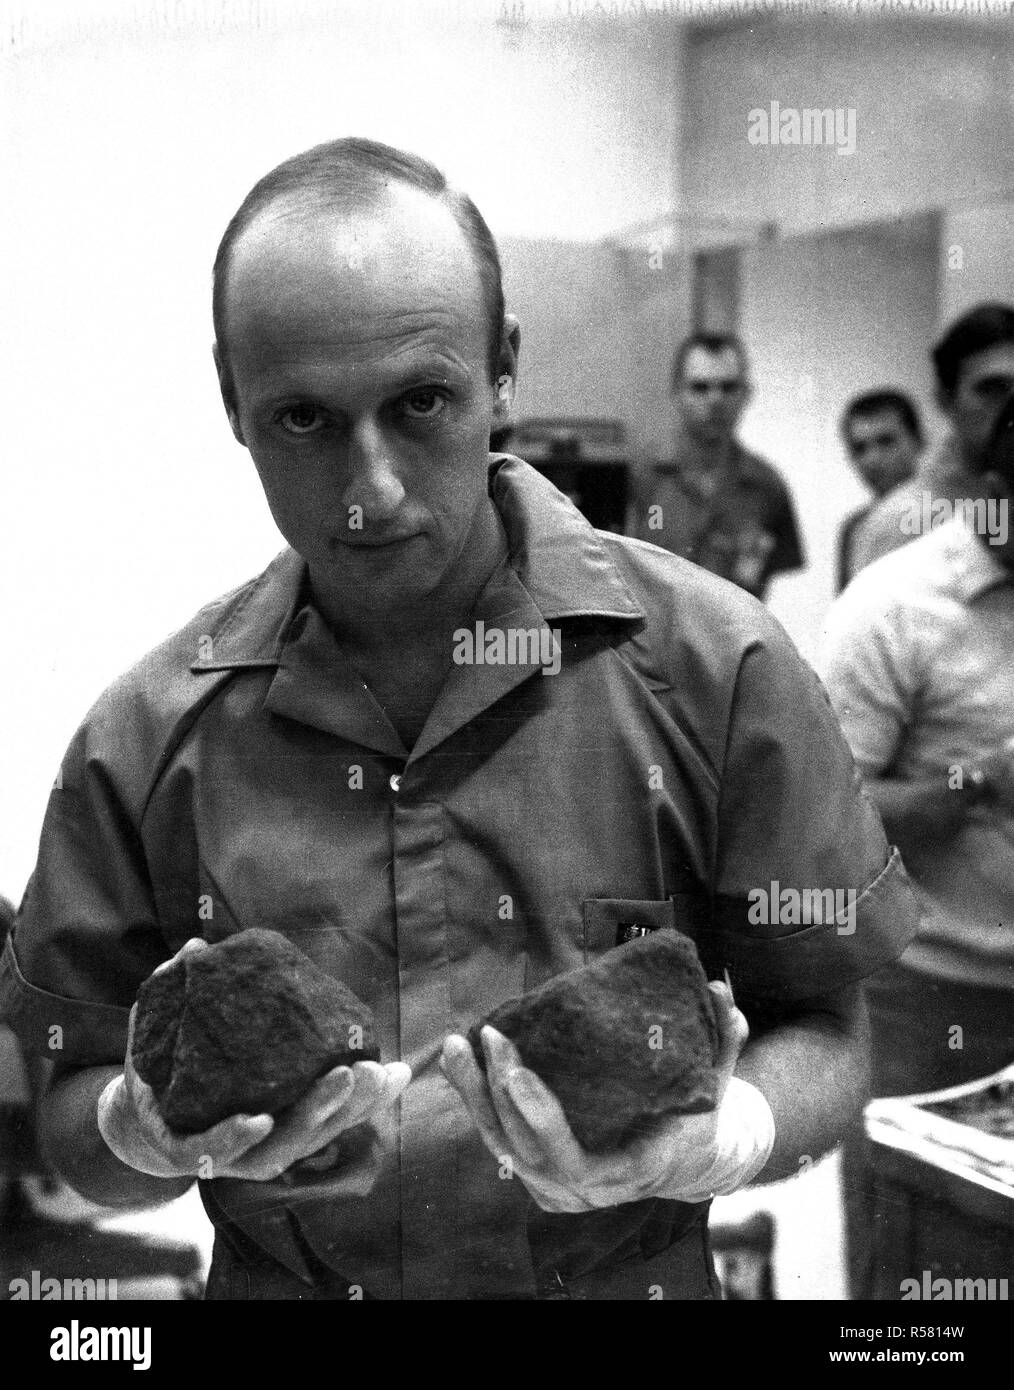 (29 Nov. 1969) --- Astronaut Charles Conrad Jr., commander of the Apollo 12 lunar landing mission, holds two lunar rocks which were among the samples brought back from the moon by the Apollo 12 astronauts. Stock Photo